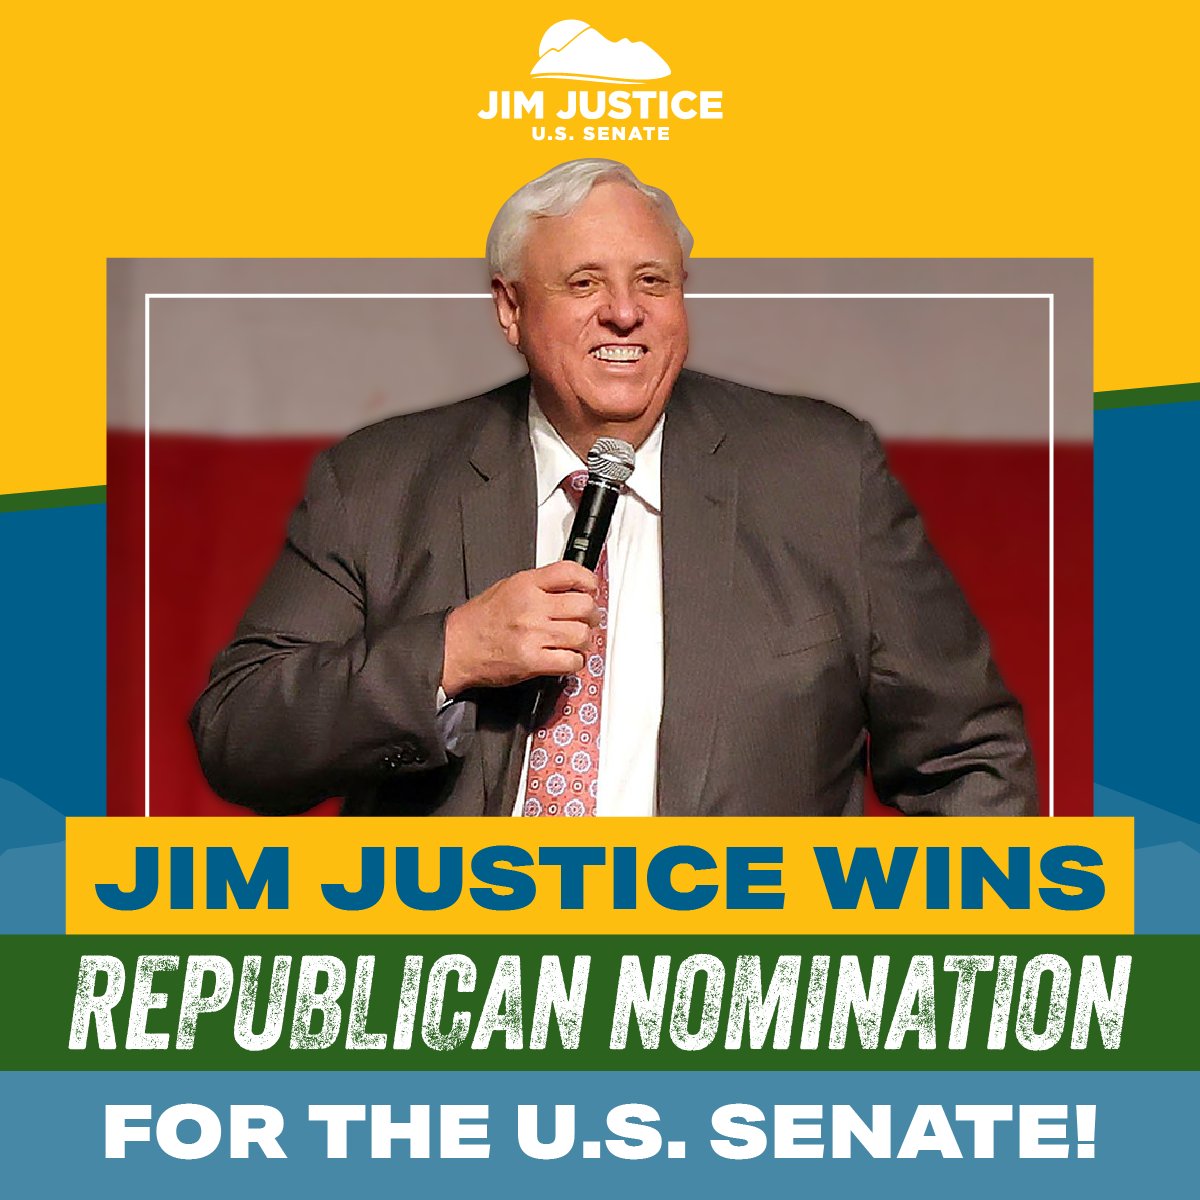 Thank you, West Virginia, for placing your support and trust in me. I am truly humbled and will work every day to win in November so we can flip the Senate and deliver on our America-First agenda!